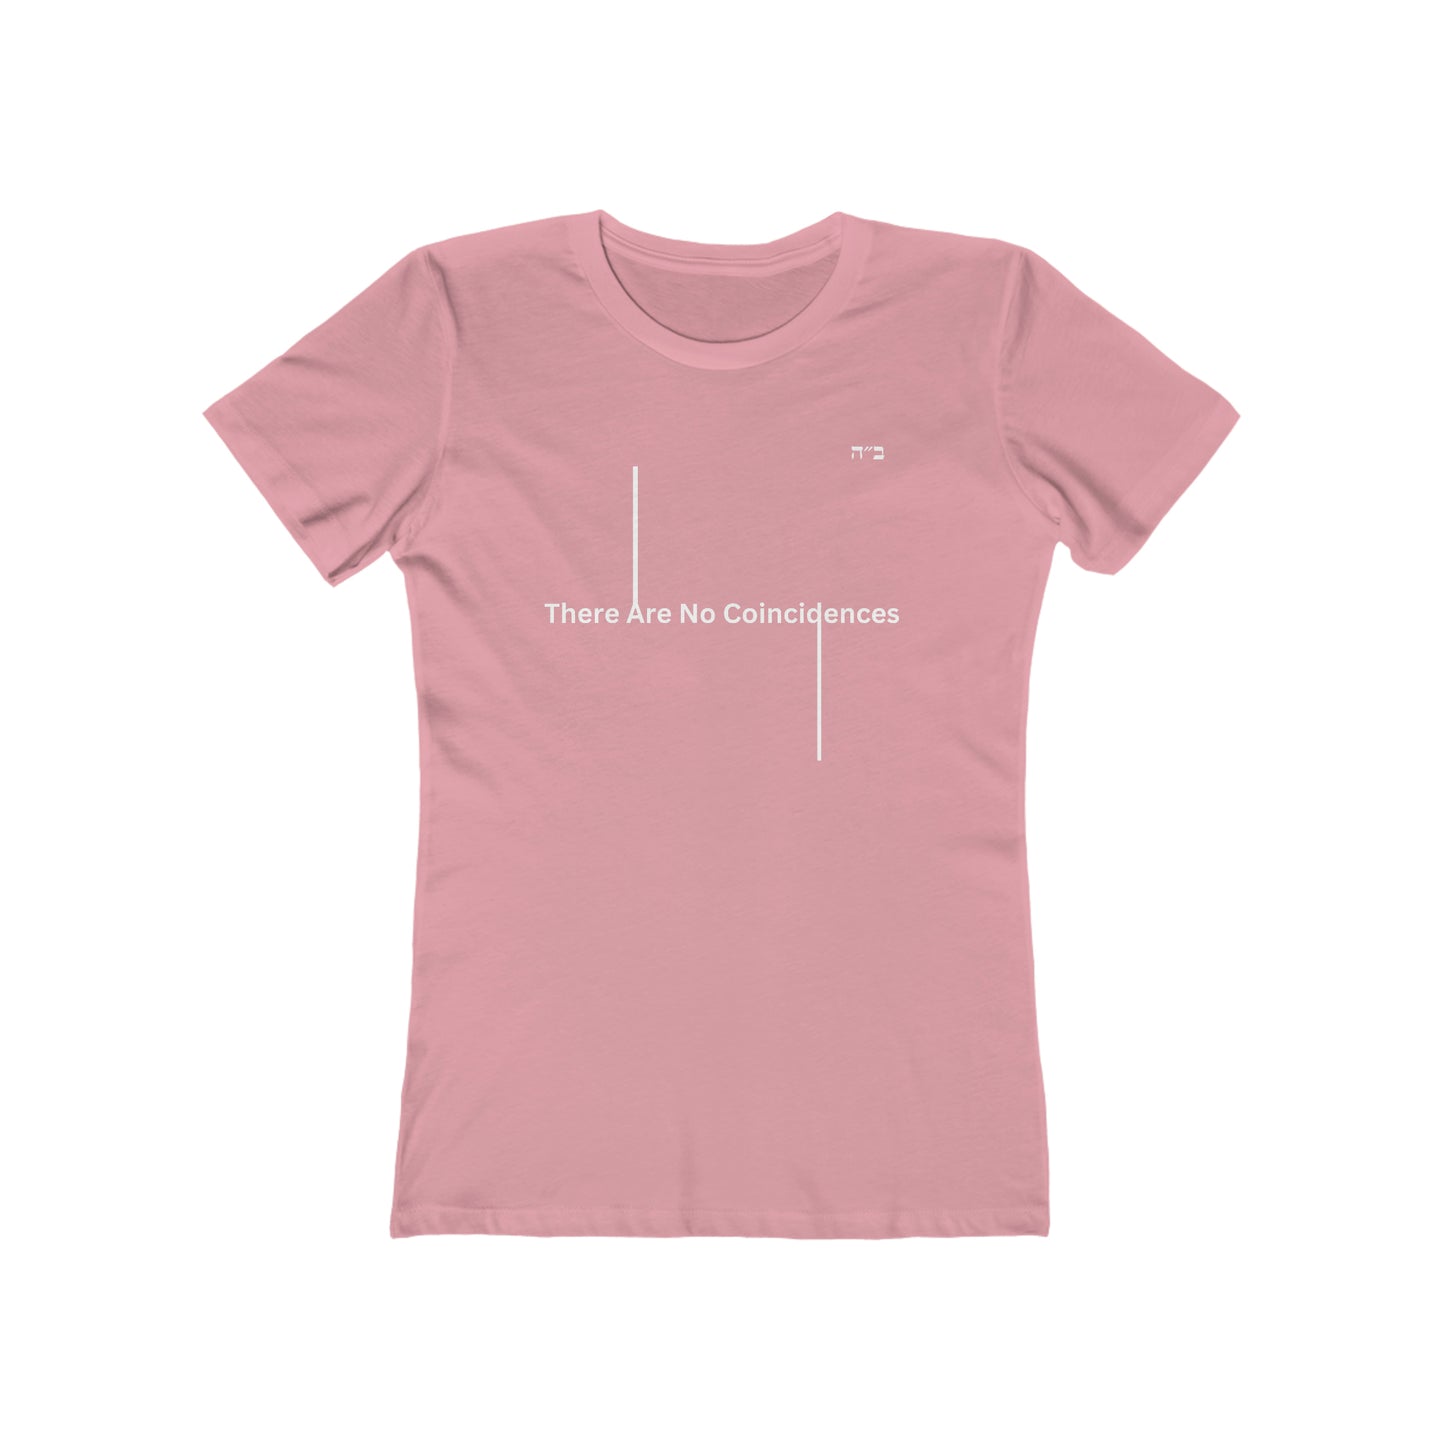 B"H There Are No Coincidences Women's Tee